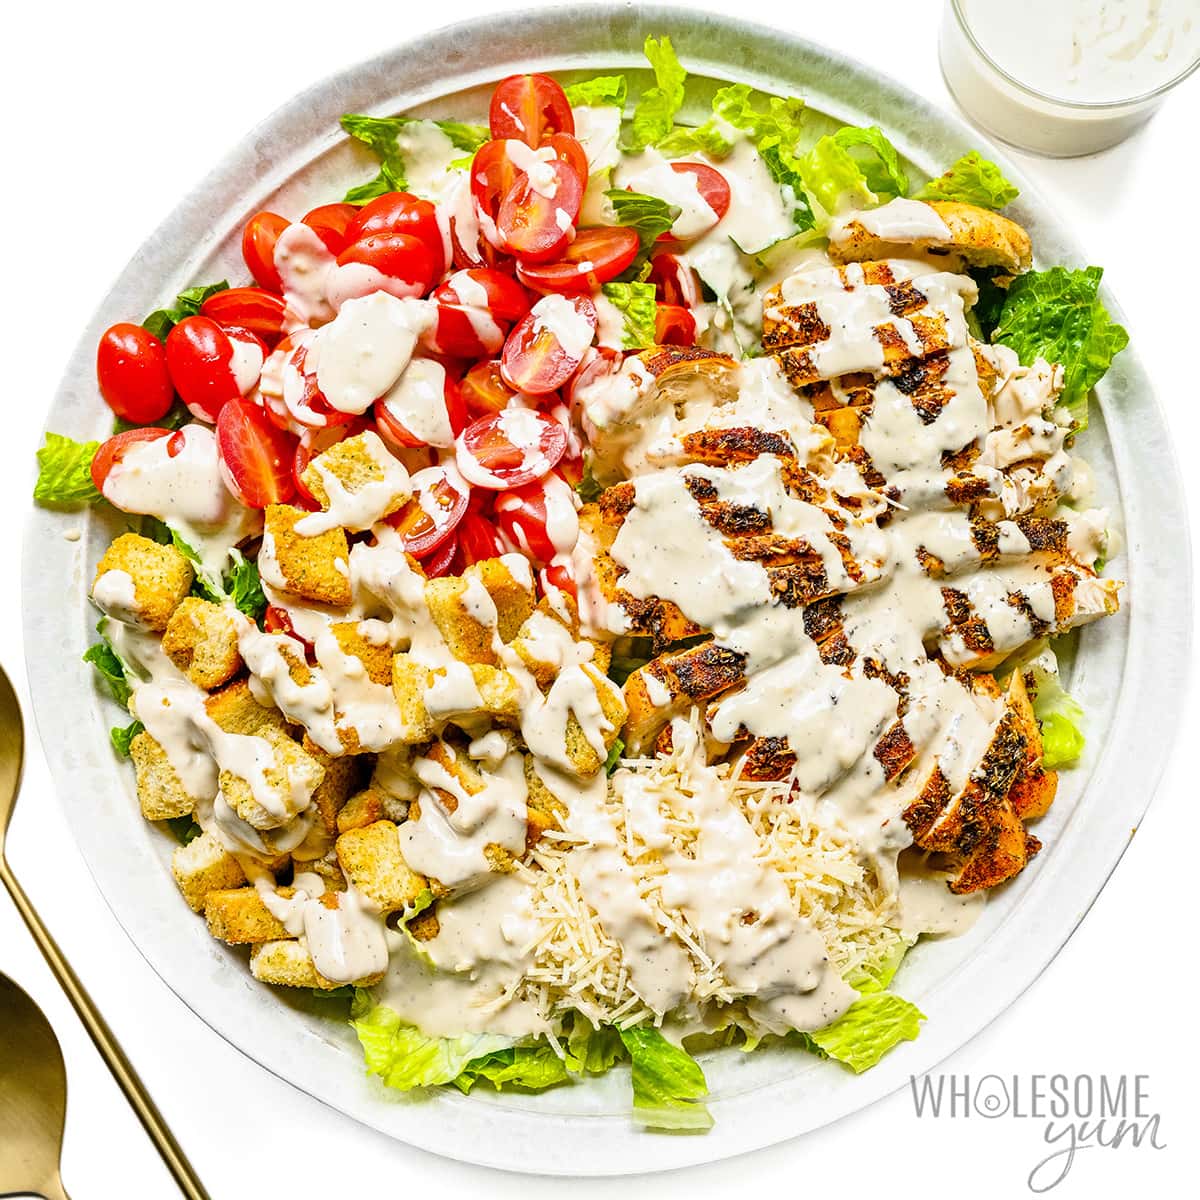 Chicken caesar salad on a plate with dressing.